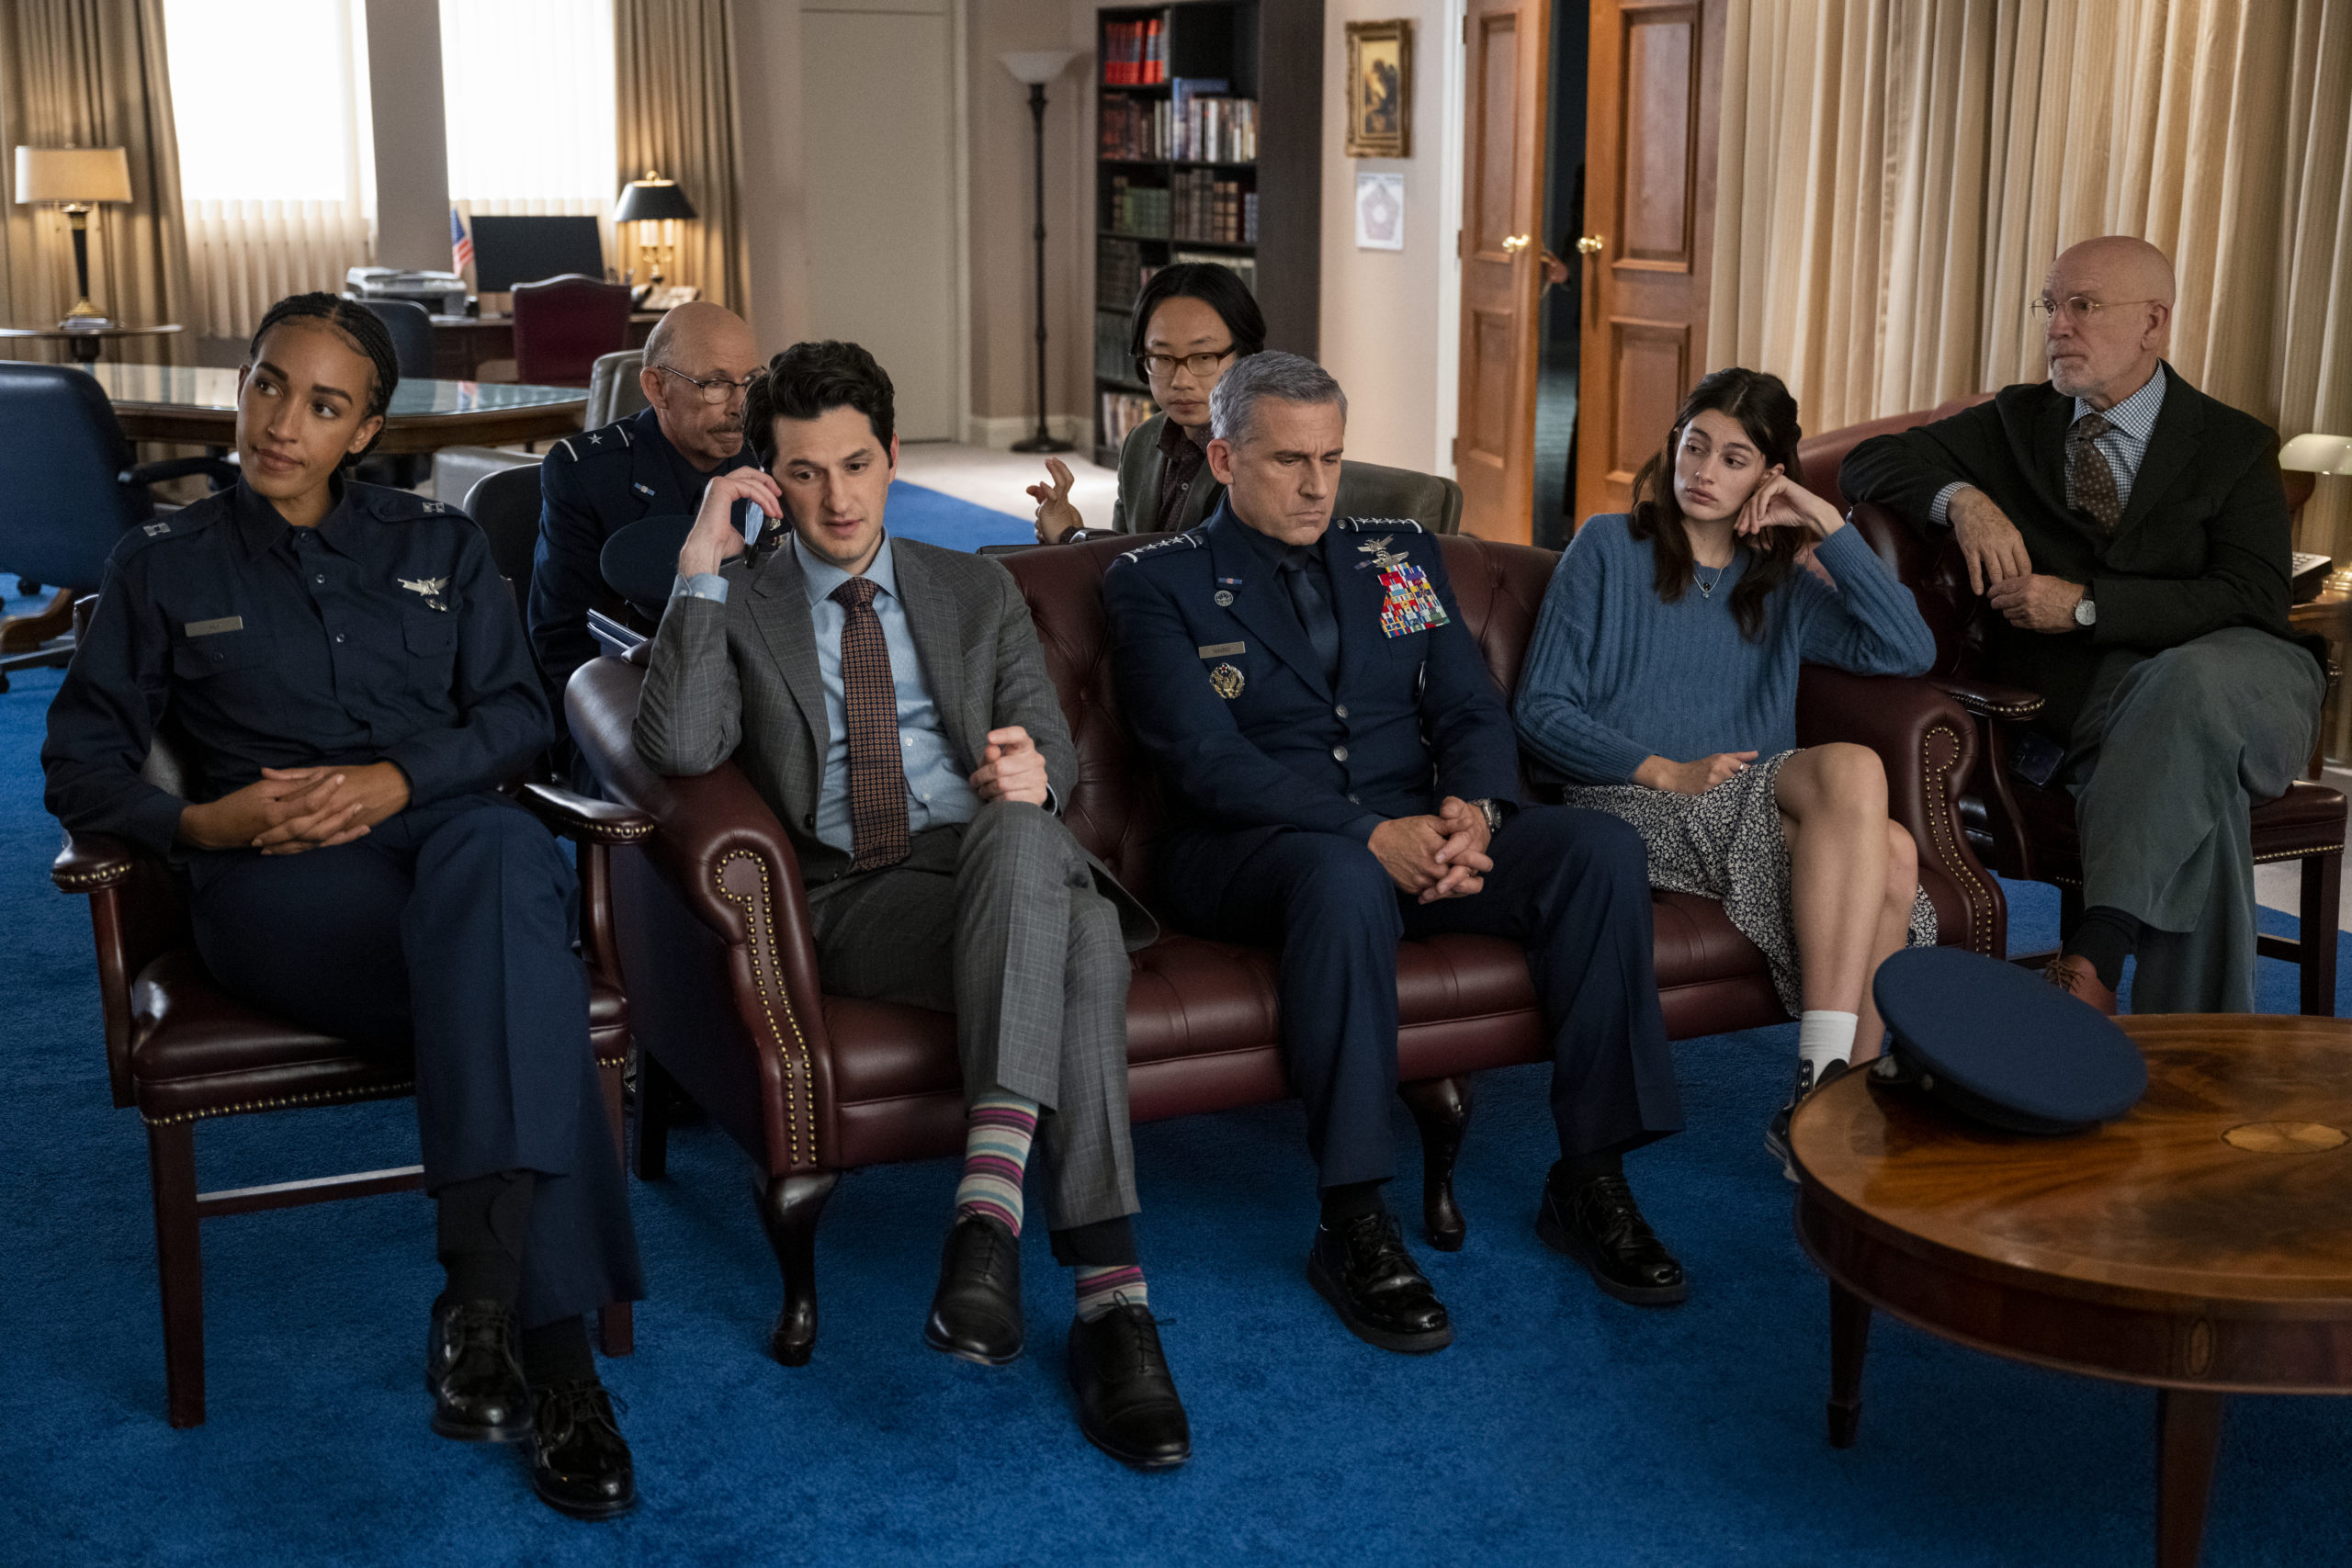 Space Force | Season 2 Trailer Finds The Team Threatened To Be Replaced